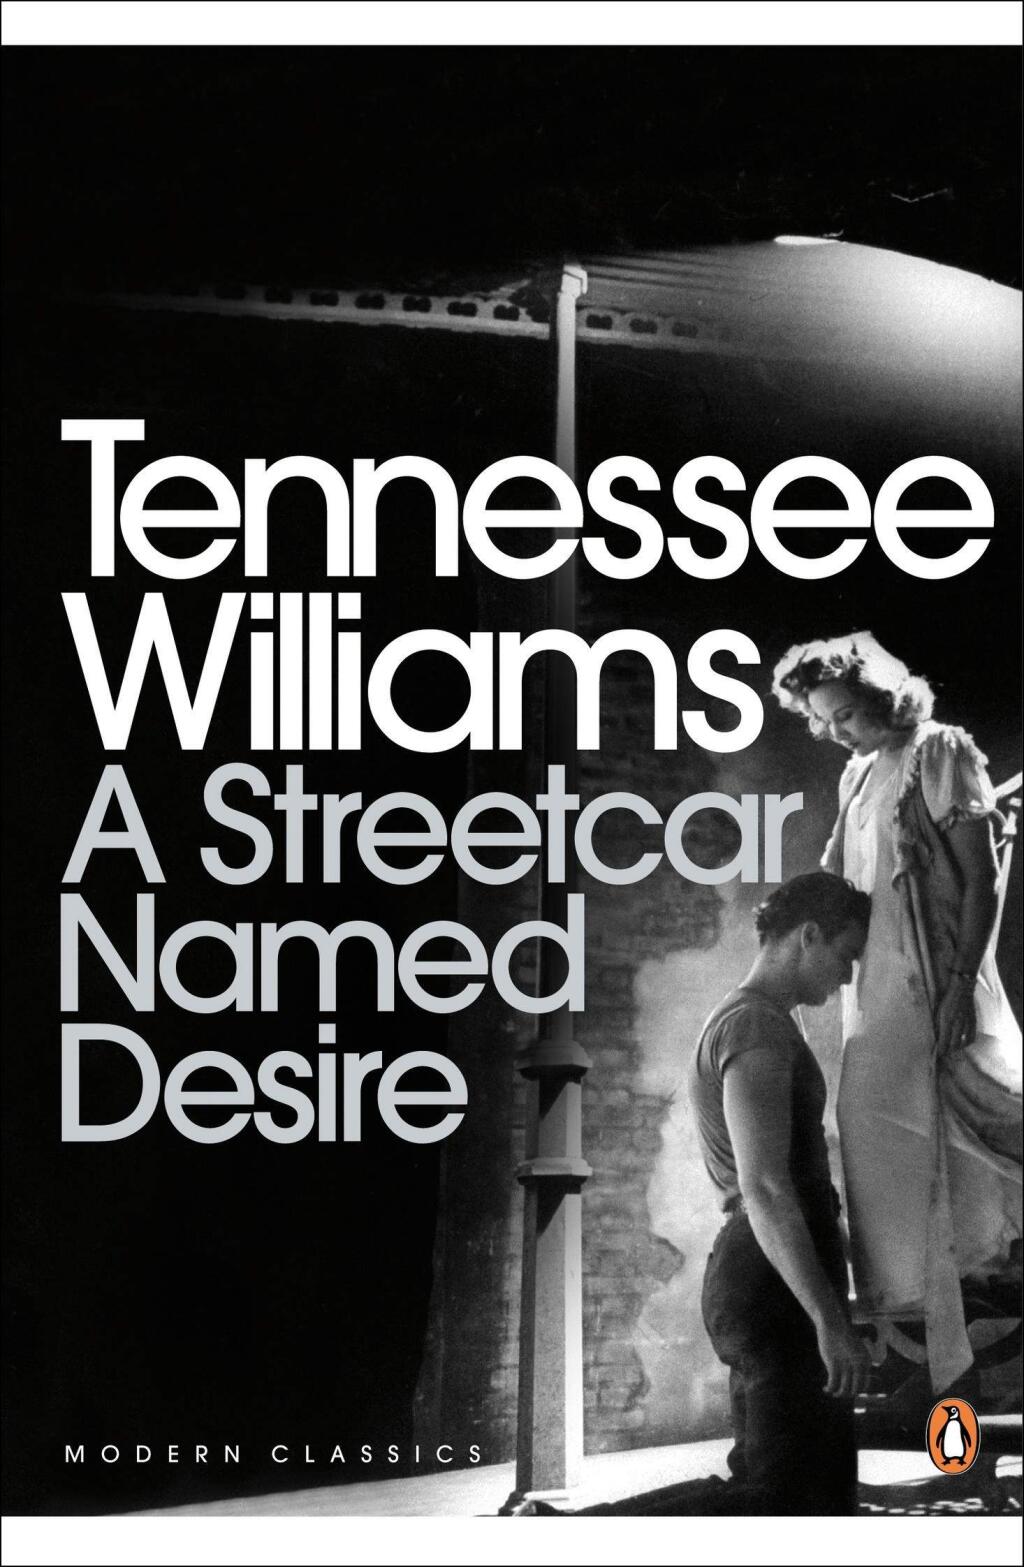 'A Streetcar Named Desire' is the Number Four bestselling book in Petaluma this week. Someone give Stella a shout about this.